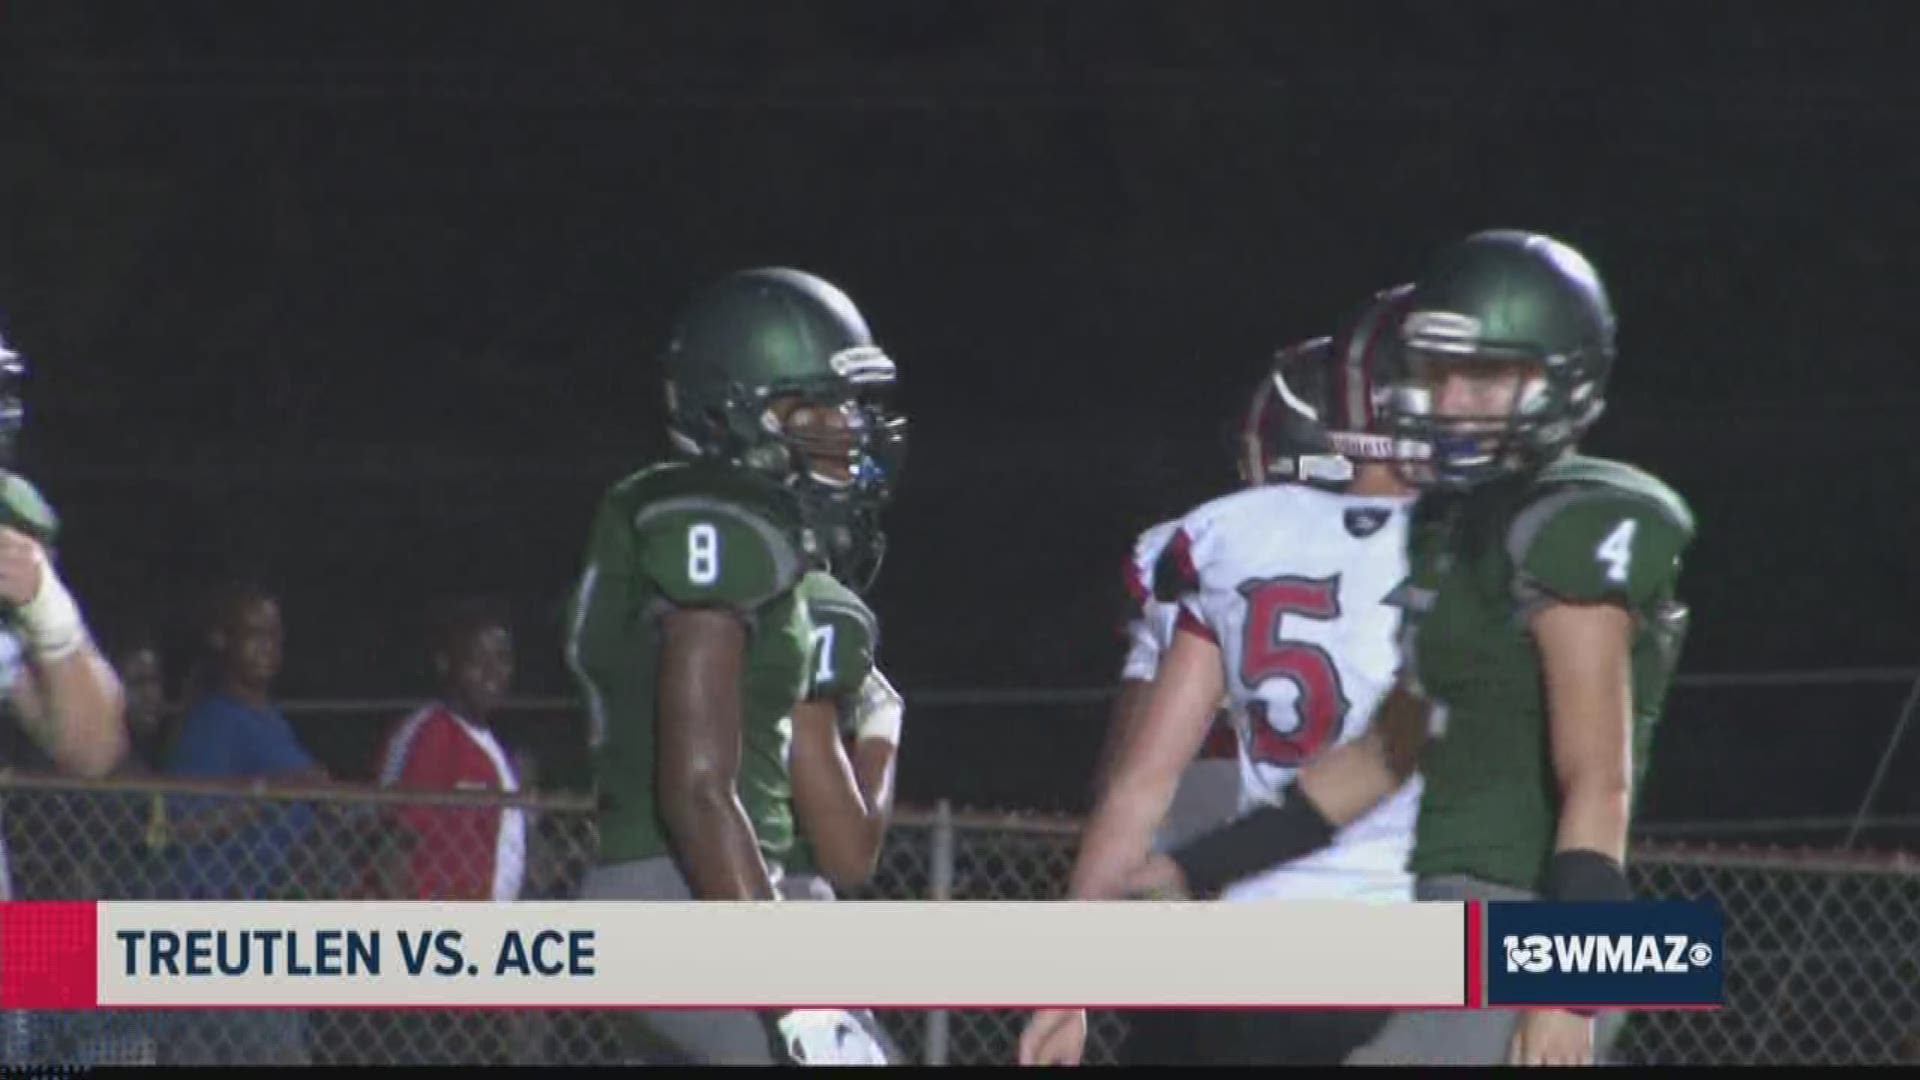 Here are your highlights from Football Friday Night.